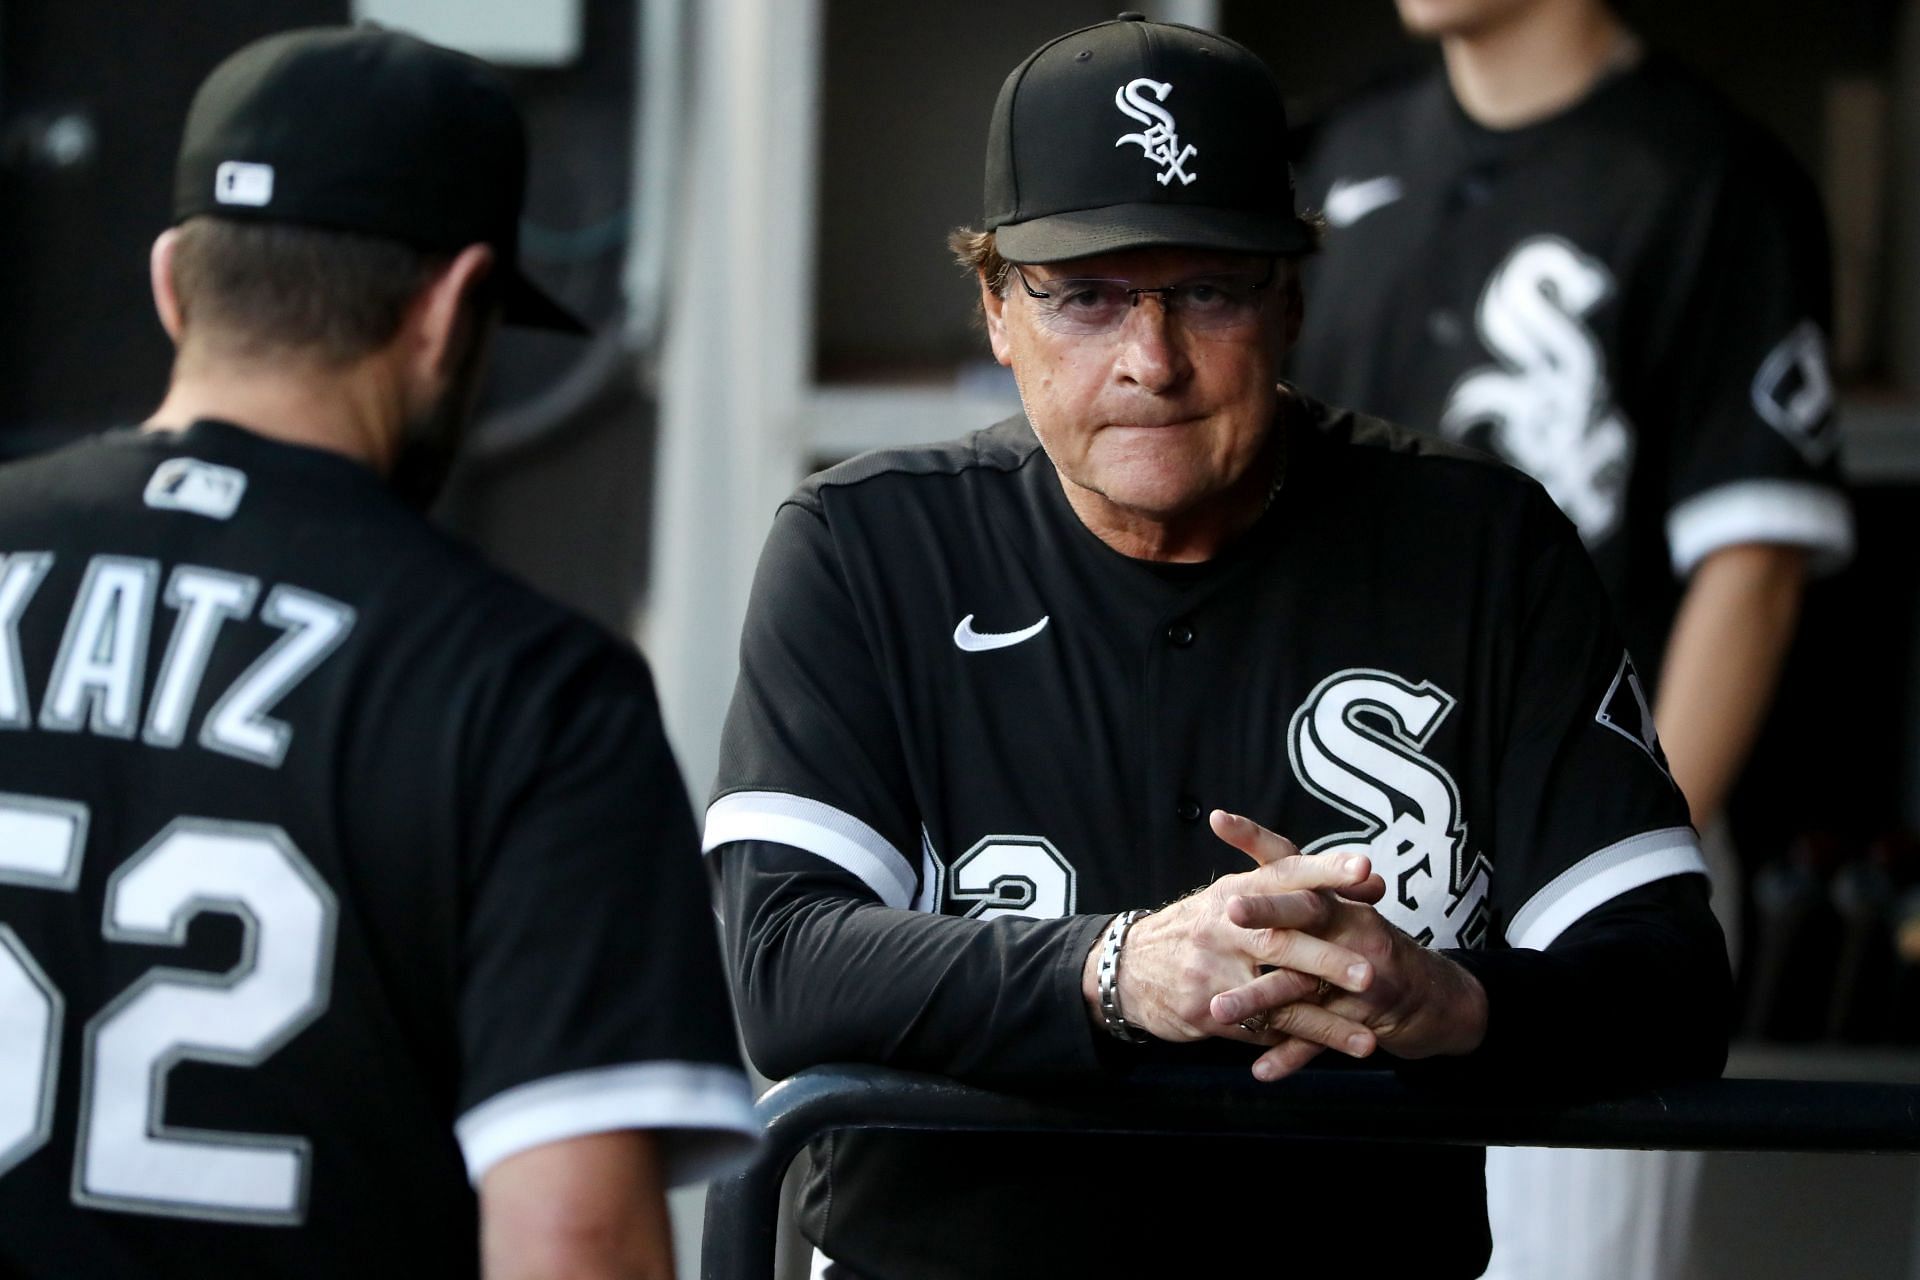 Who are the possible candidates to replace Tony La Russa as the